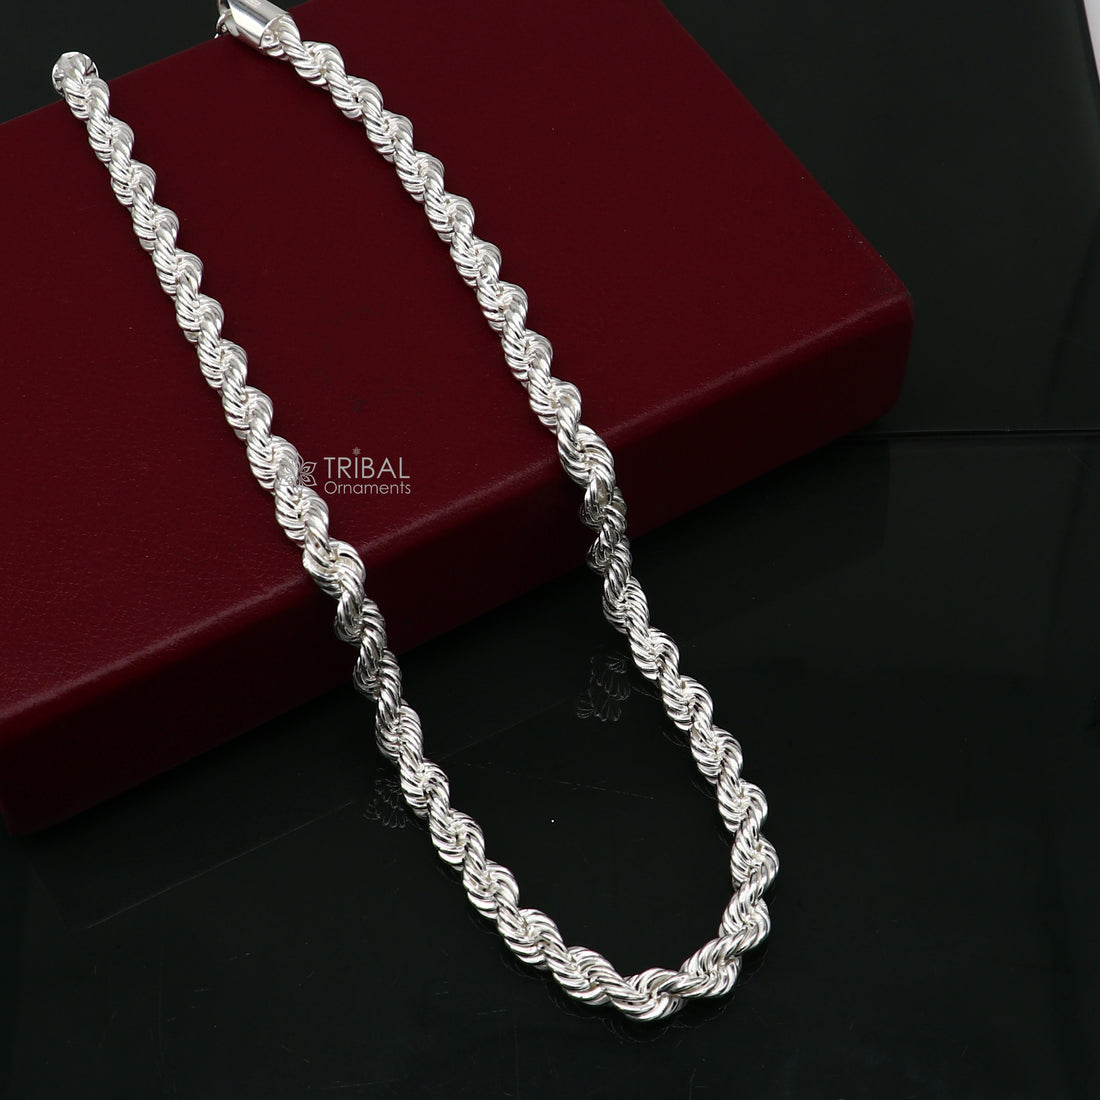 20/24 Heavy 8mm Rope chain 925 sterling silver handmade rope chain,  necklace chain, plain bright silver trendy style men's chain ch570